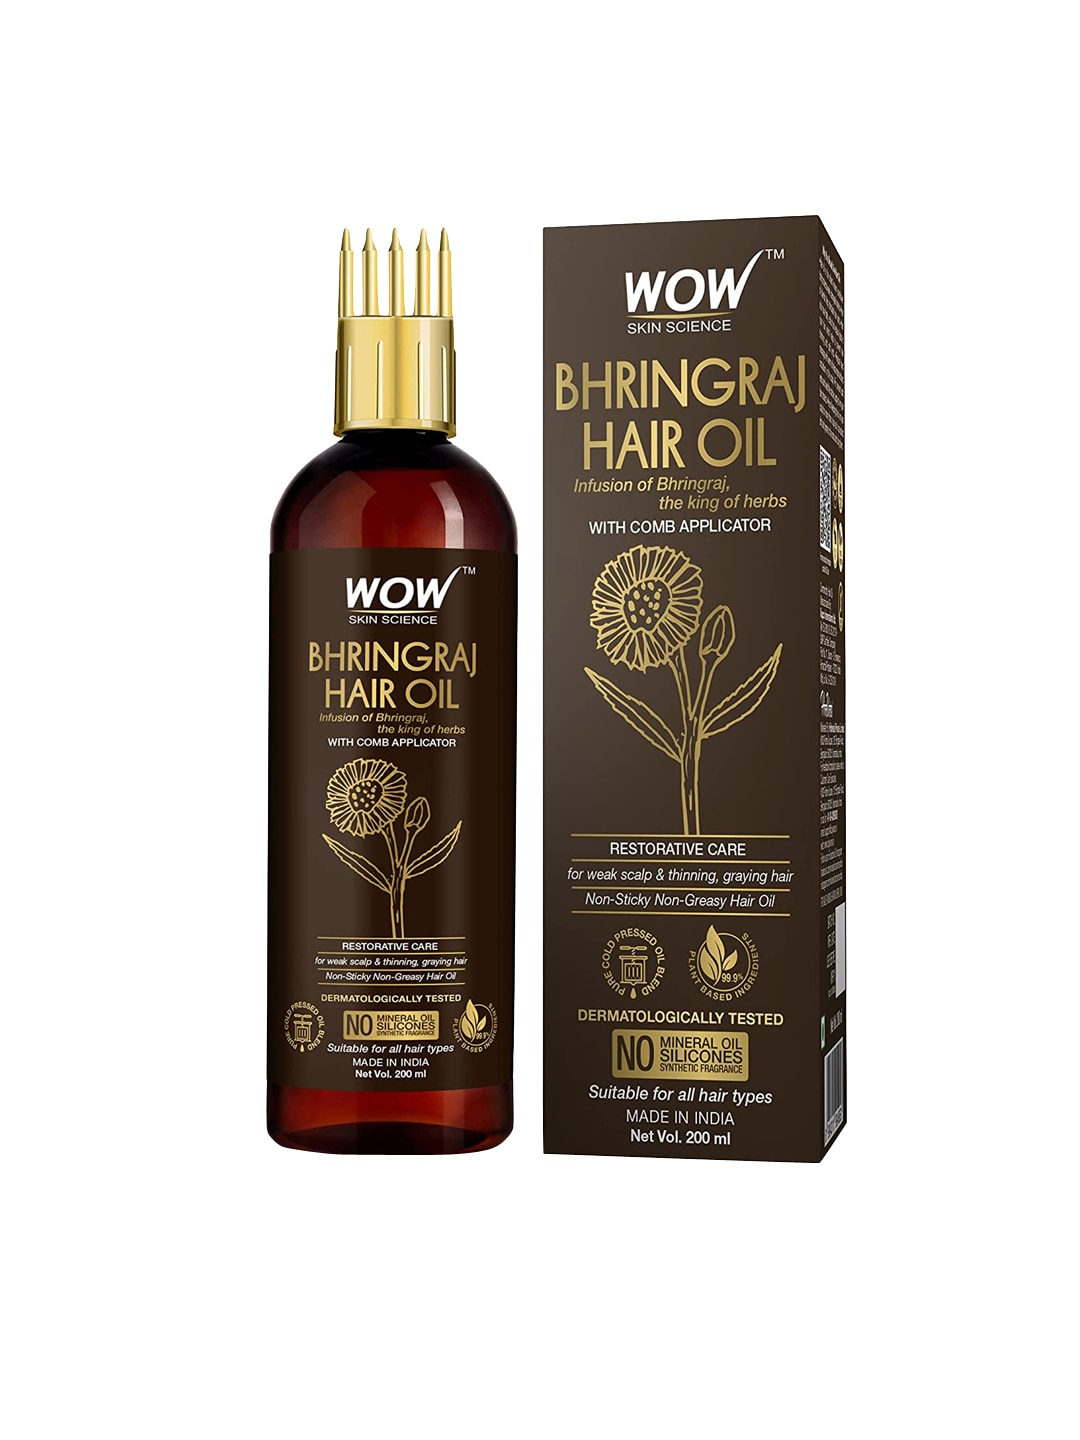 WOW SKIN SCIENCE Bhringraj Hair Oil for Hair Restoration with Comb Applicator - 100ml Price in India